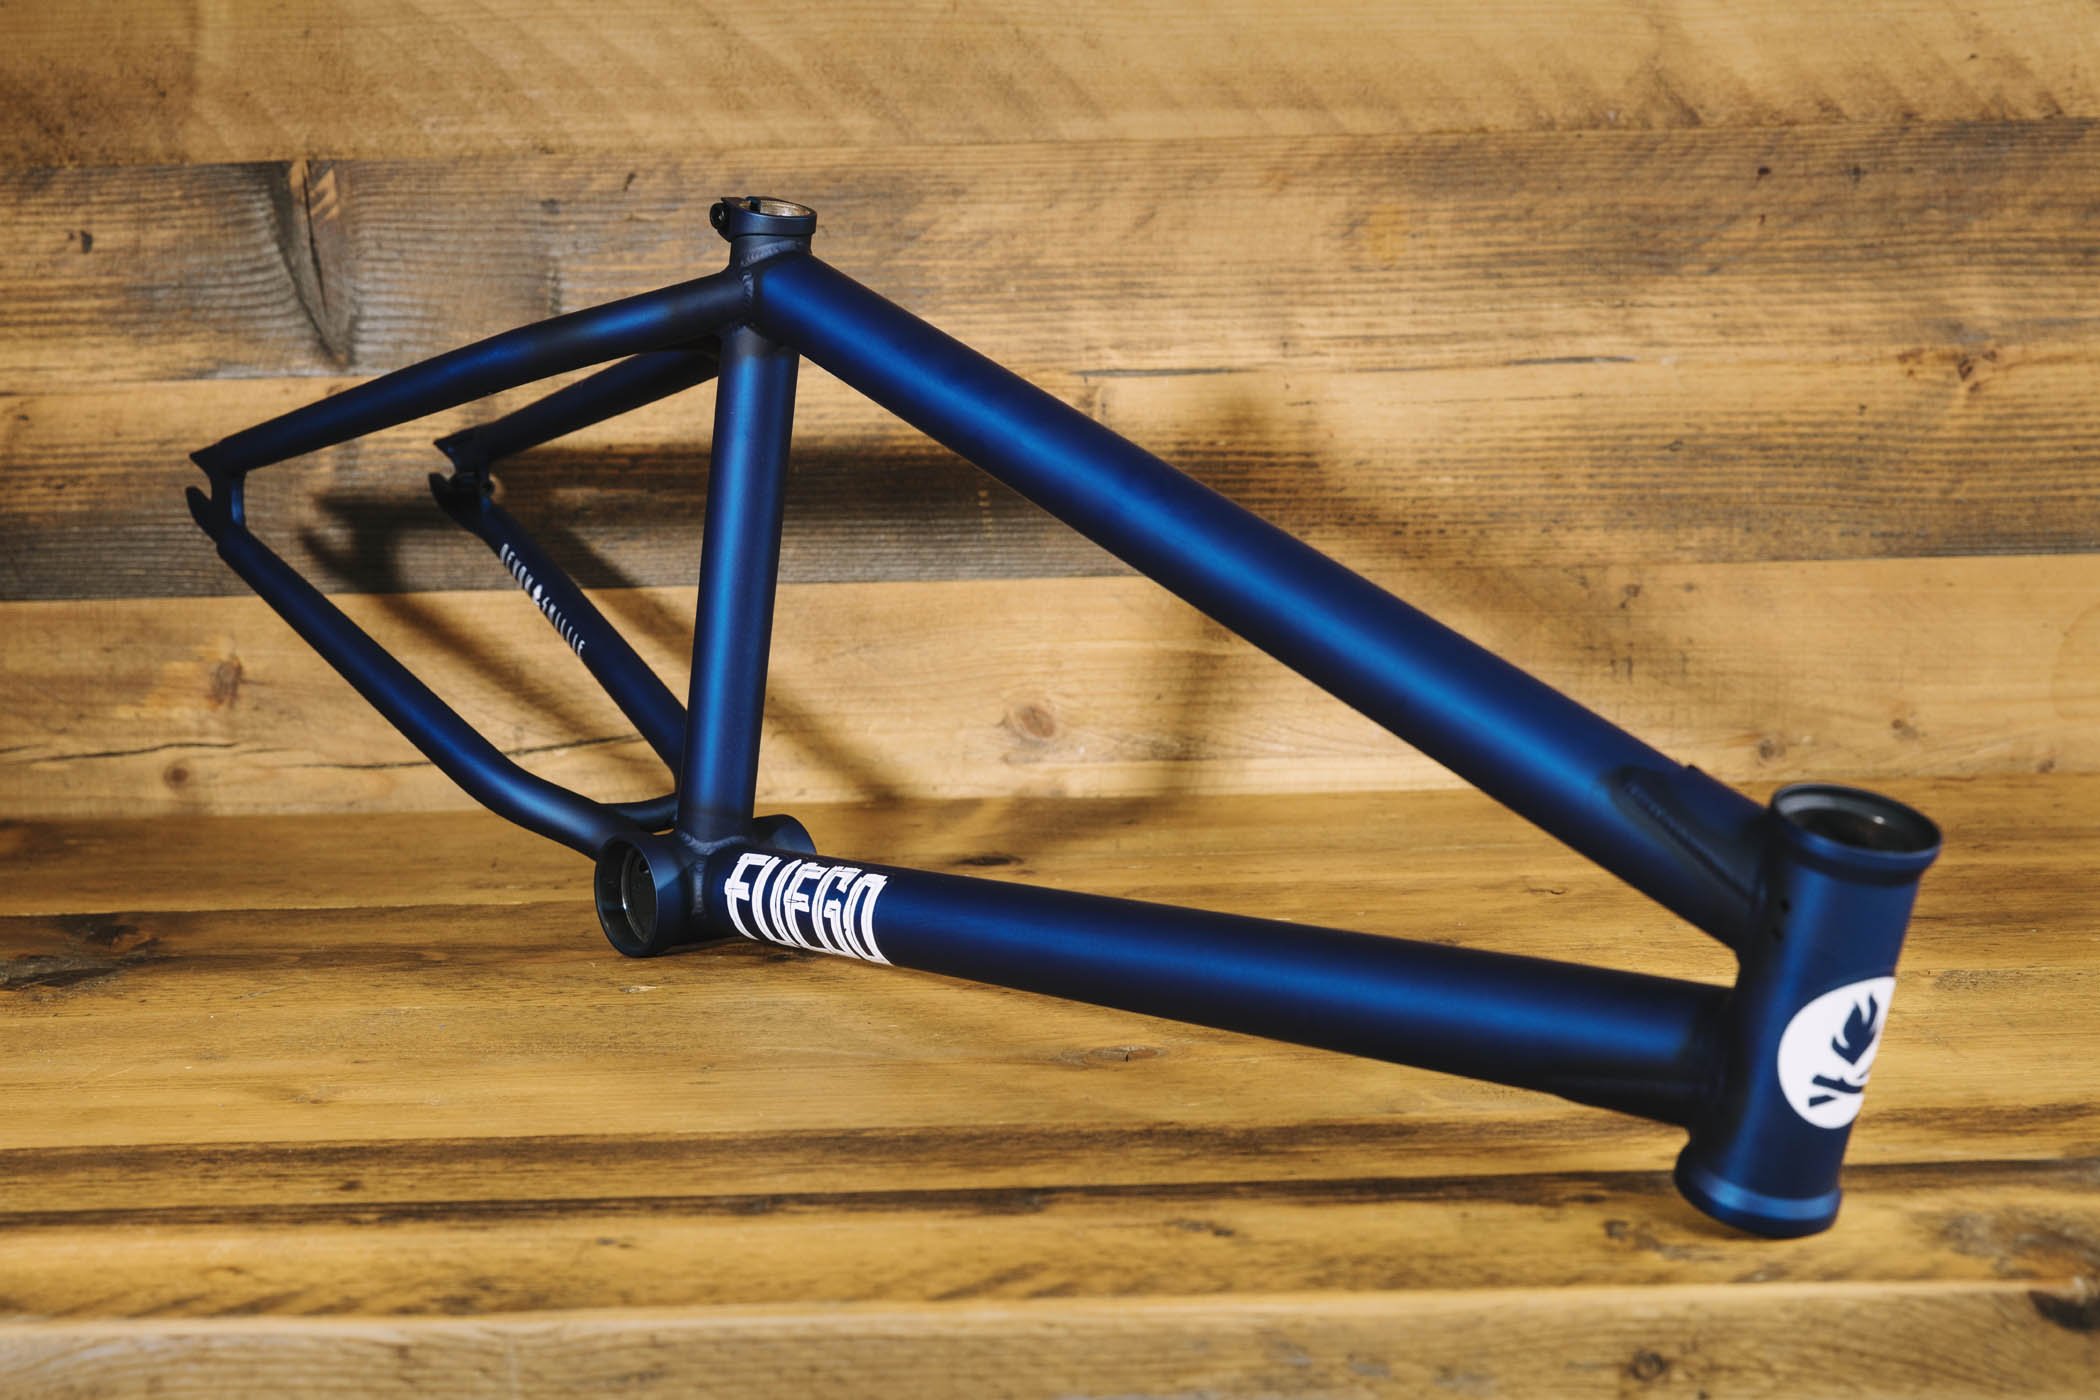 FLYBIKES FUEGO 4 FRAME – REVIEW